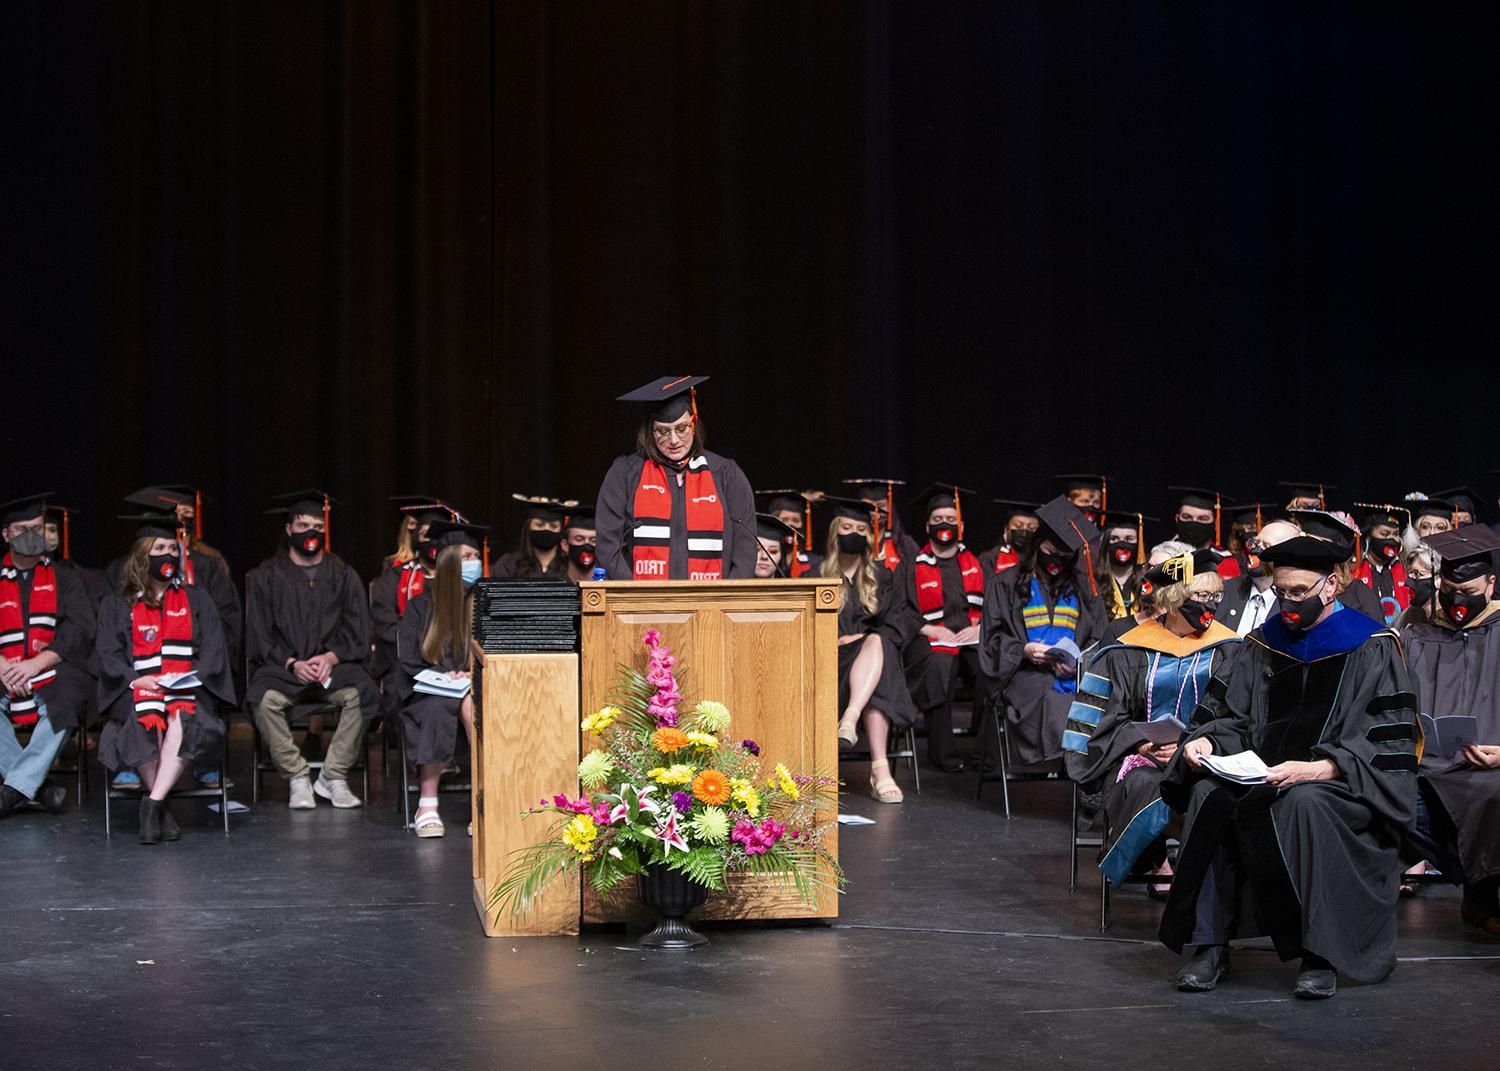 graduate speaker stands at the podium with graduates on stage